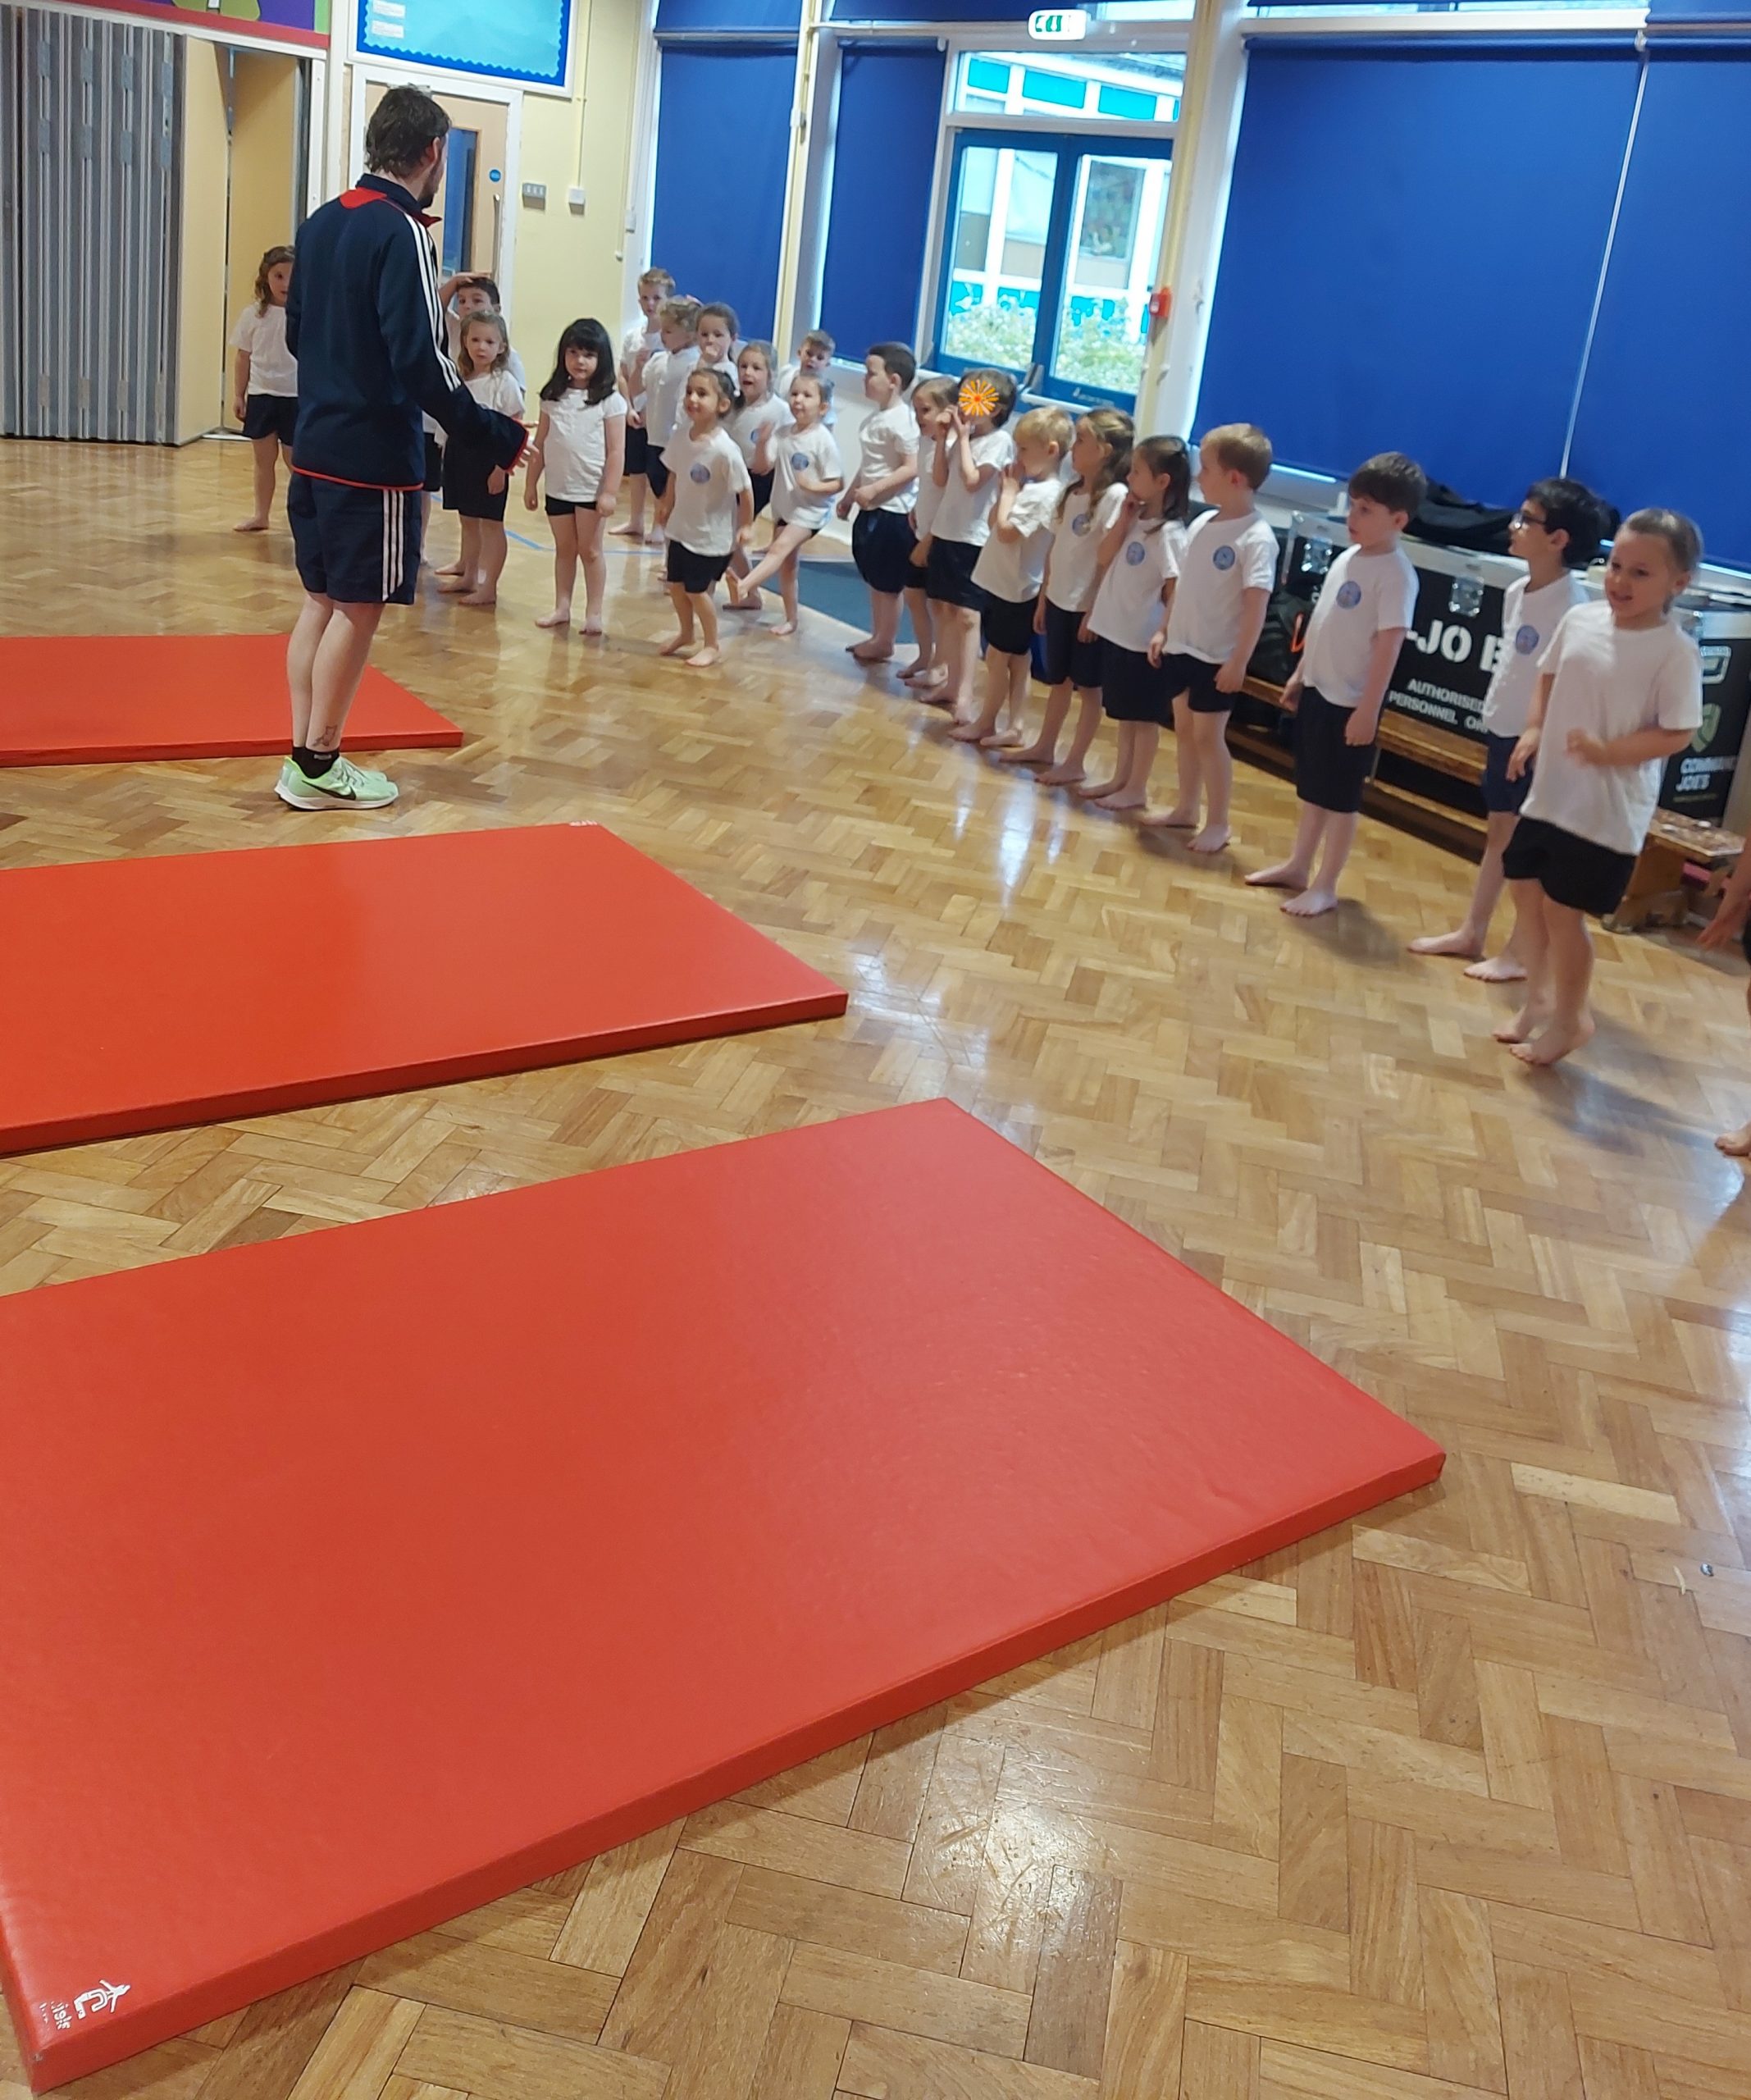 Class 3 taking part in gymnastics with Mr Gilmore